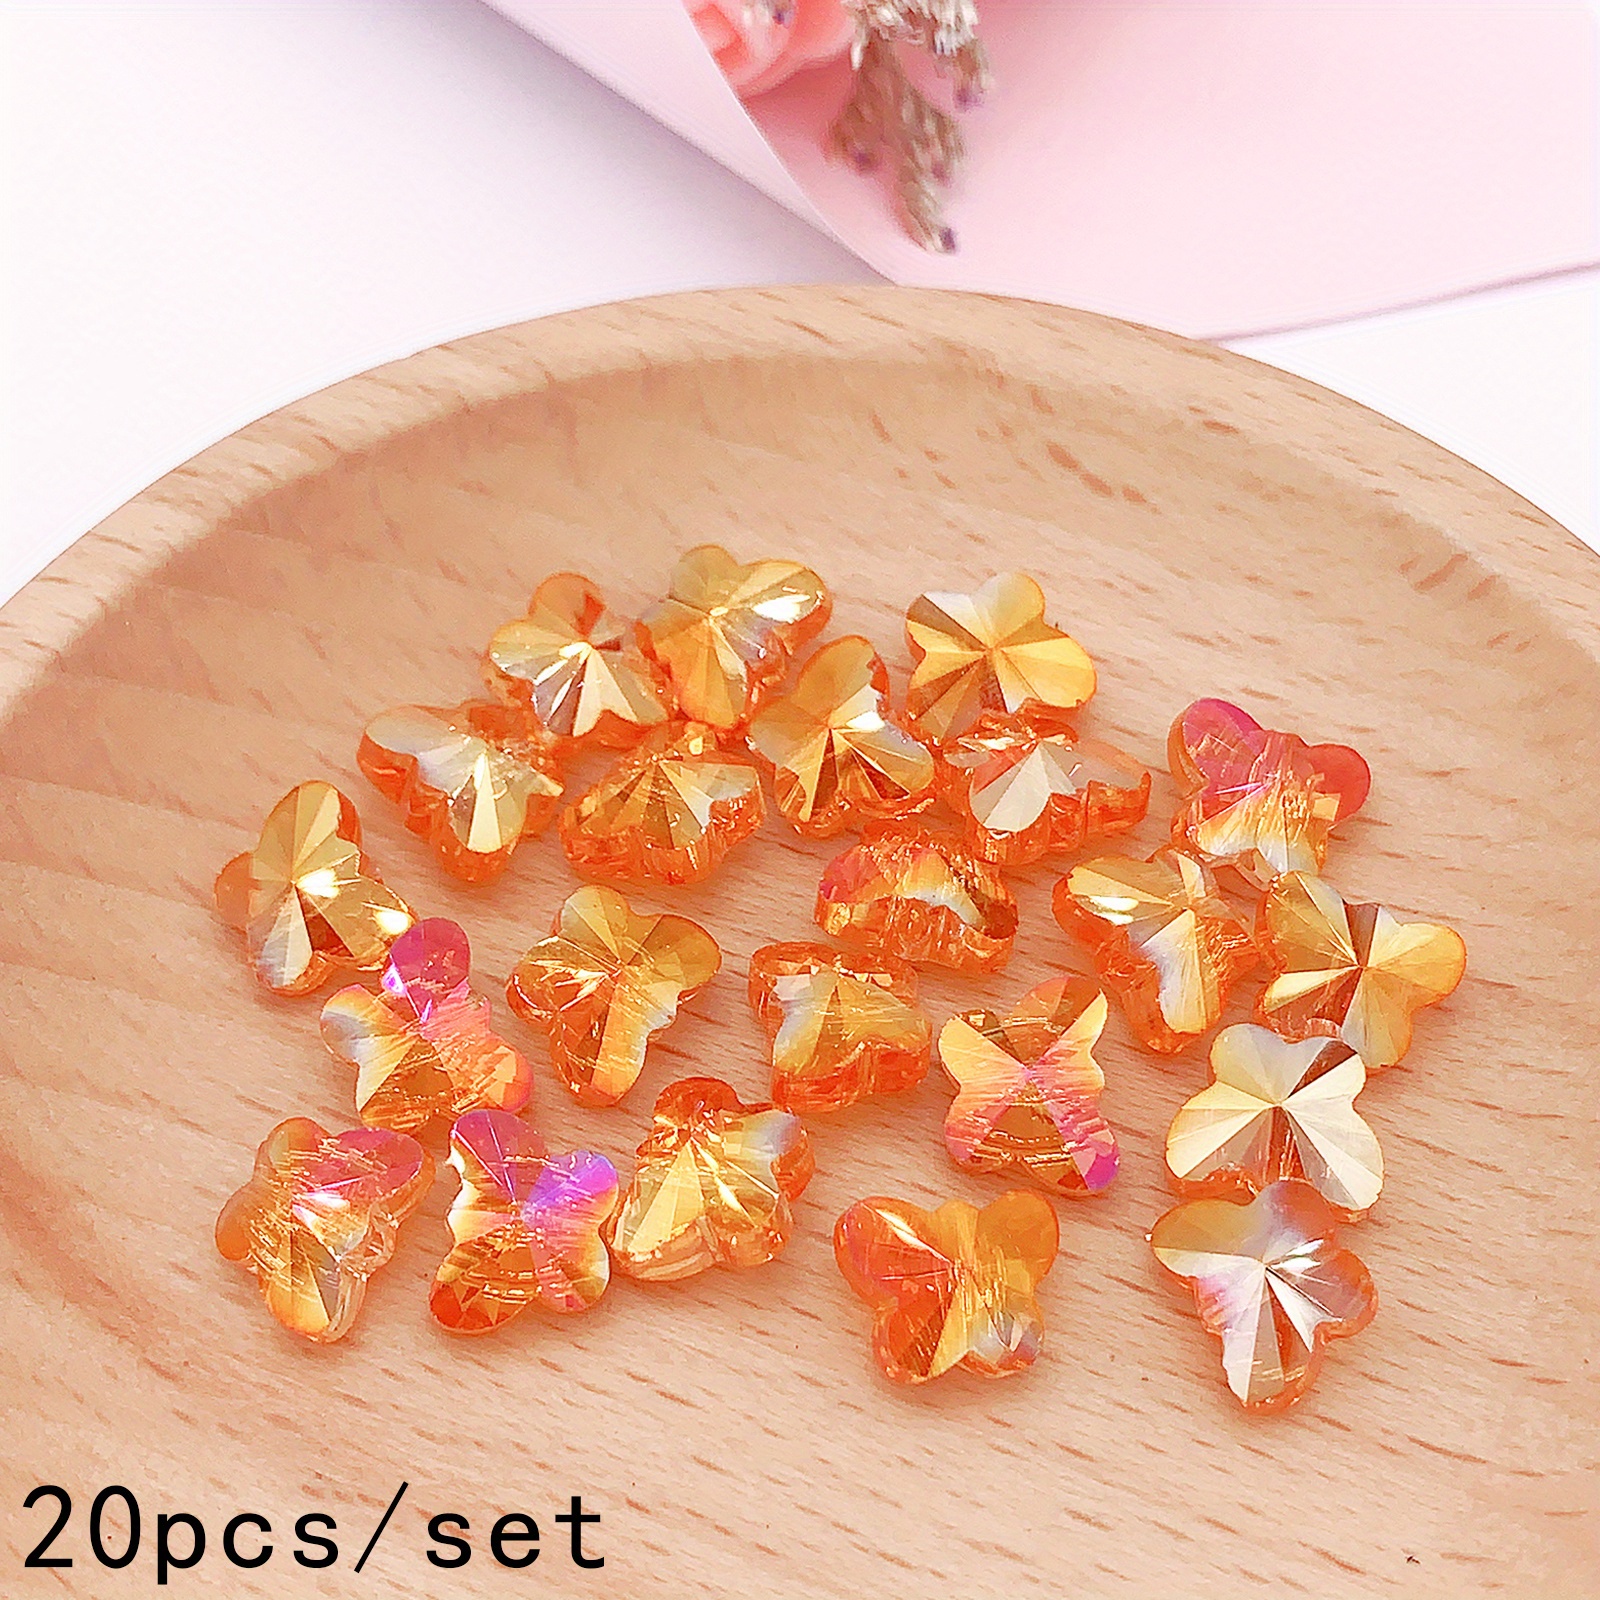 Lumanie 100pcs Crystal Butterfly Beads, 14mm Butterfly Shape Crystal Glass Beads with 10 Mixed Colors for DIY Jewellery Making and CH